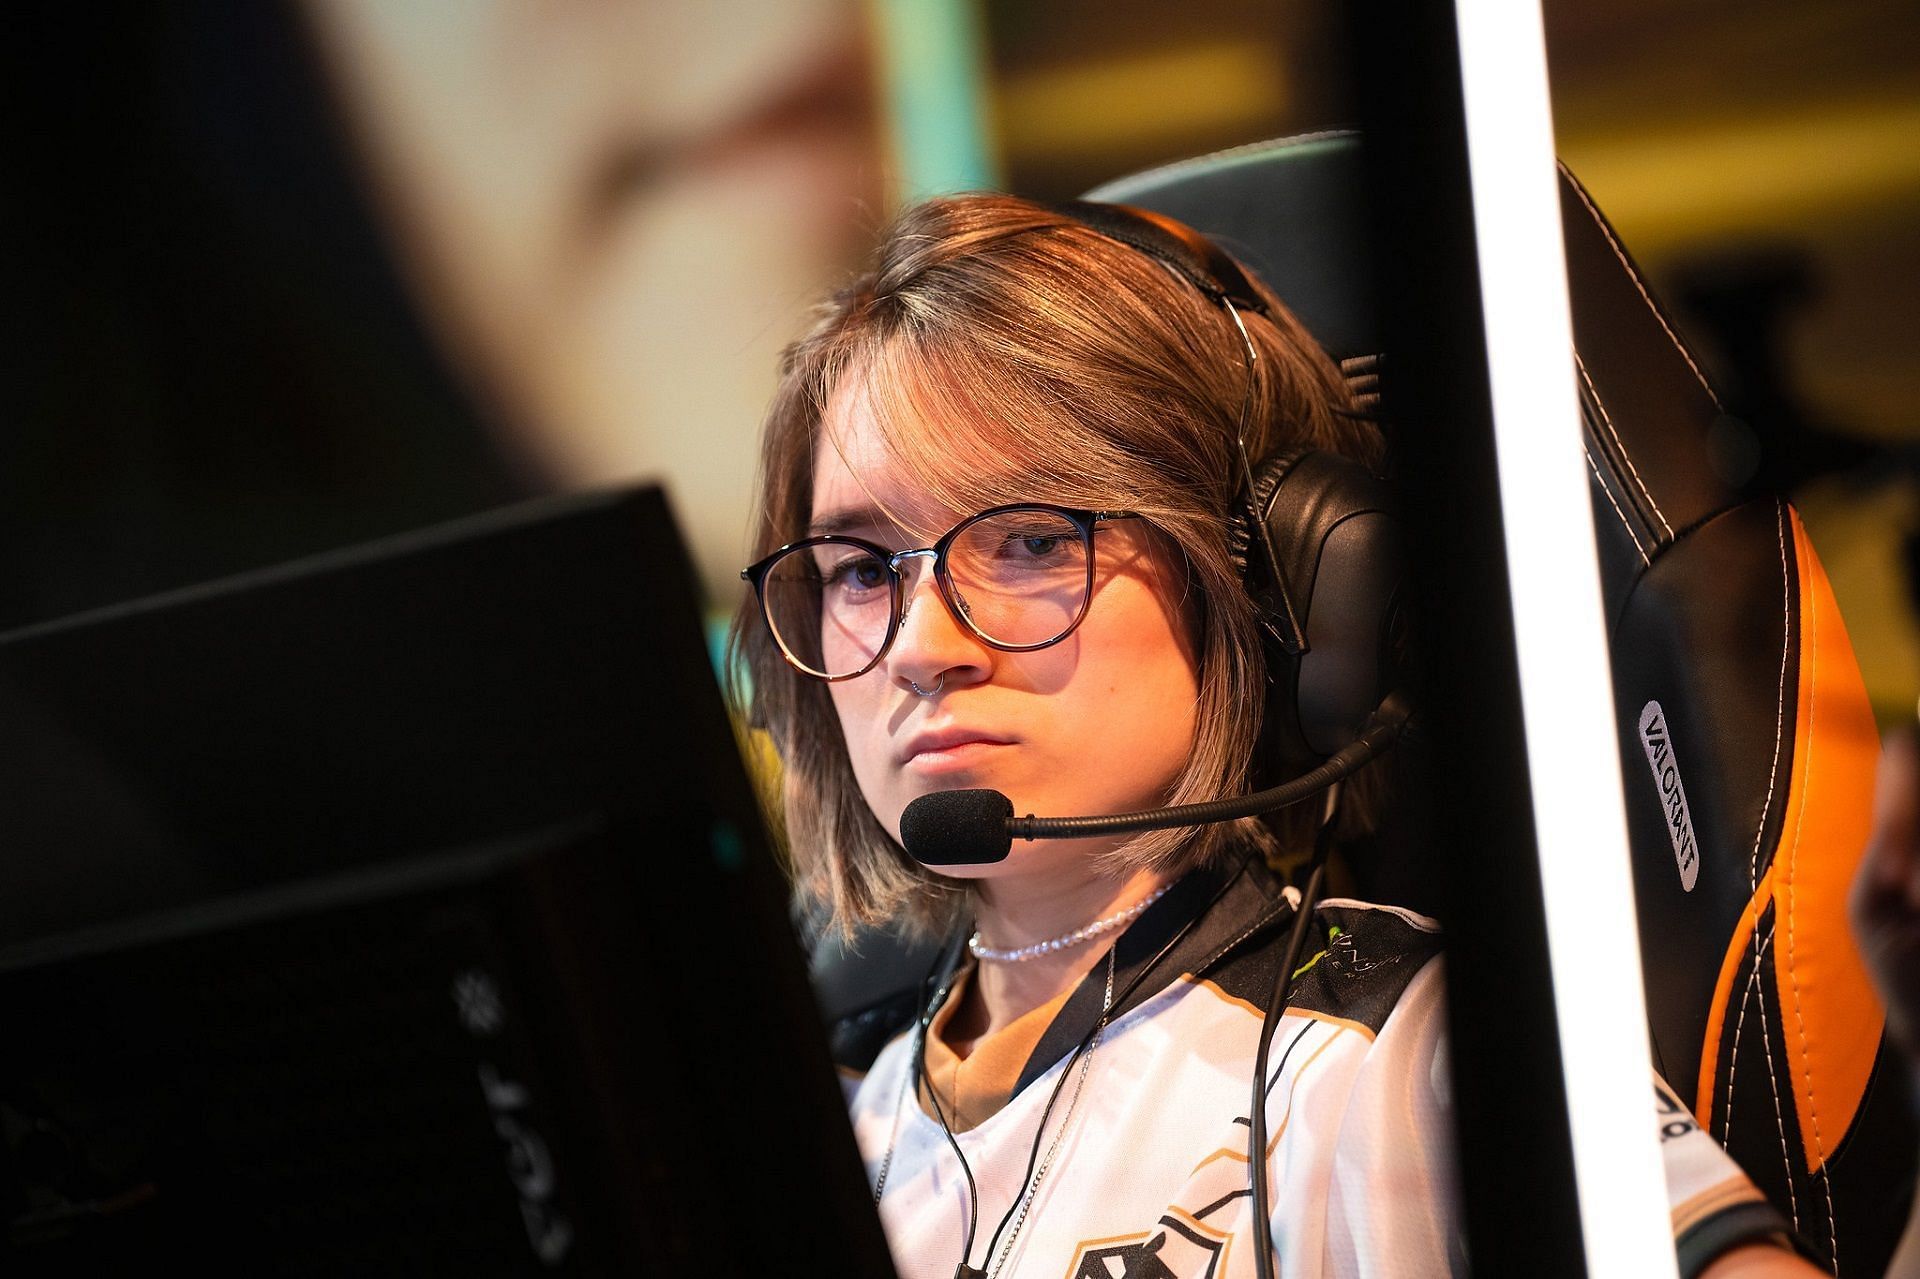 daiki from Team Liquid Brazil in VCT Game Changers Berlin (Image via flickr)